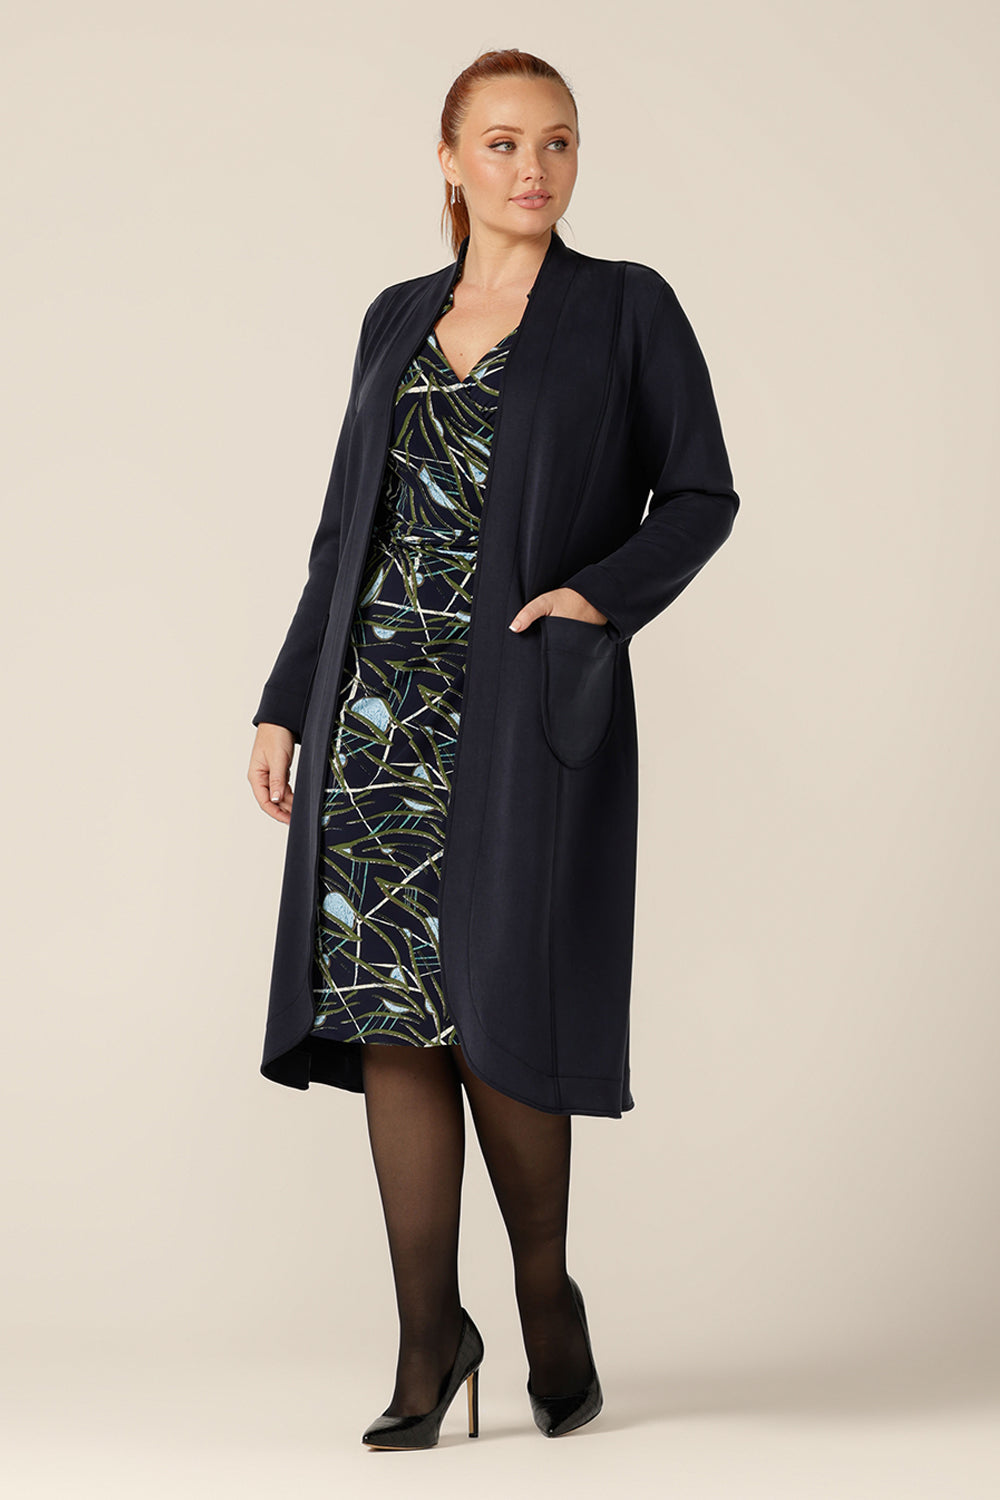 A size 12 woman wears the Marant Trenchcoat in Bluestone by Australian and New Zealand size inclusive clothing label, L&F. A collarless, open fronted coat with tie belt and patch pockets, this navy coat is worn with a jersey wrap dress for winter workwear layering.